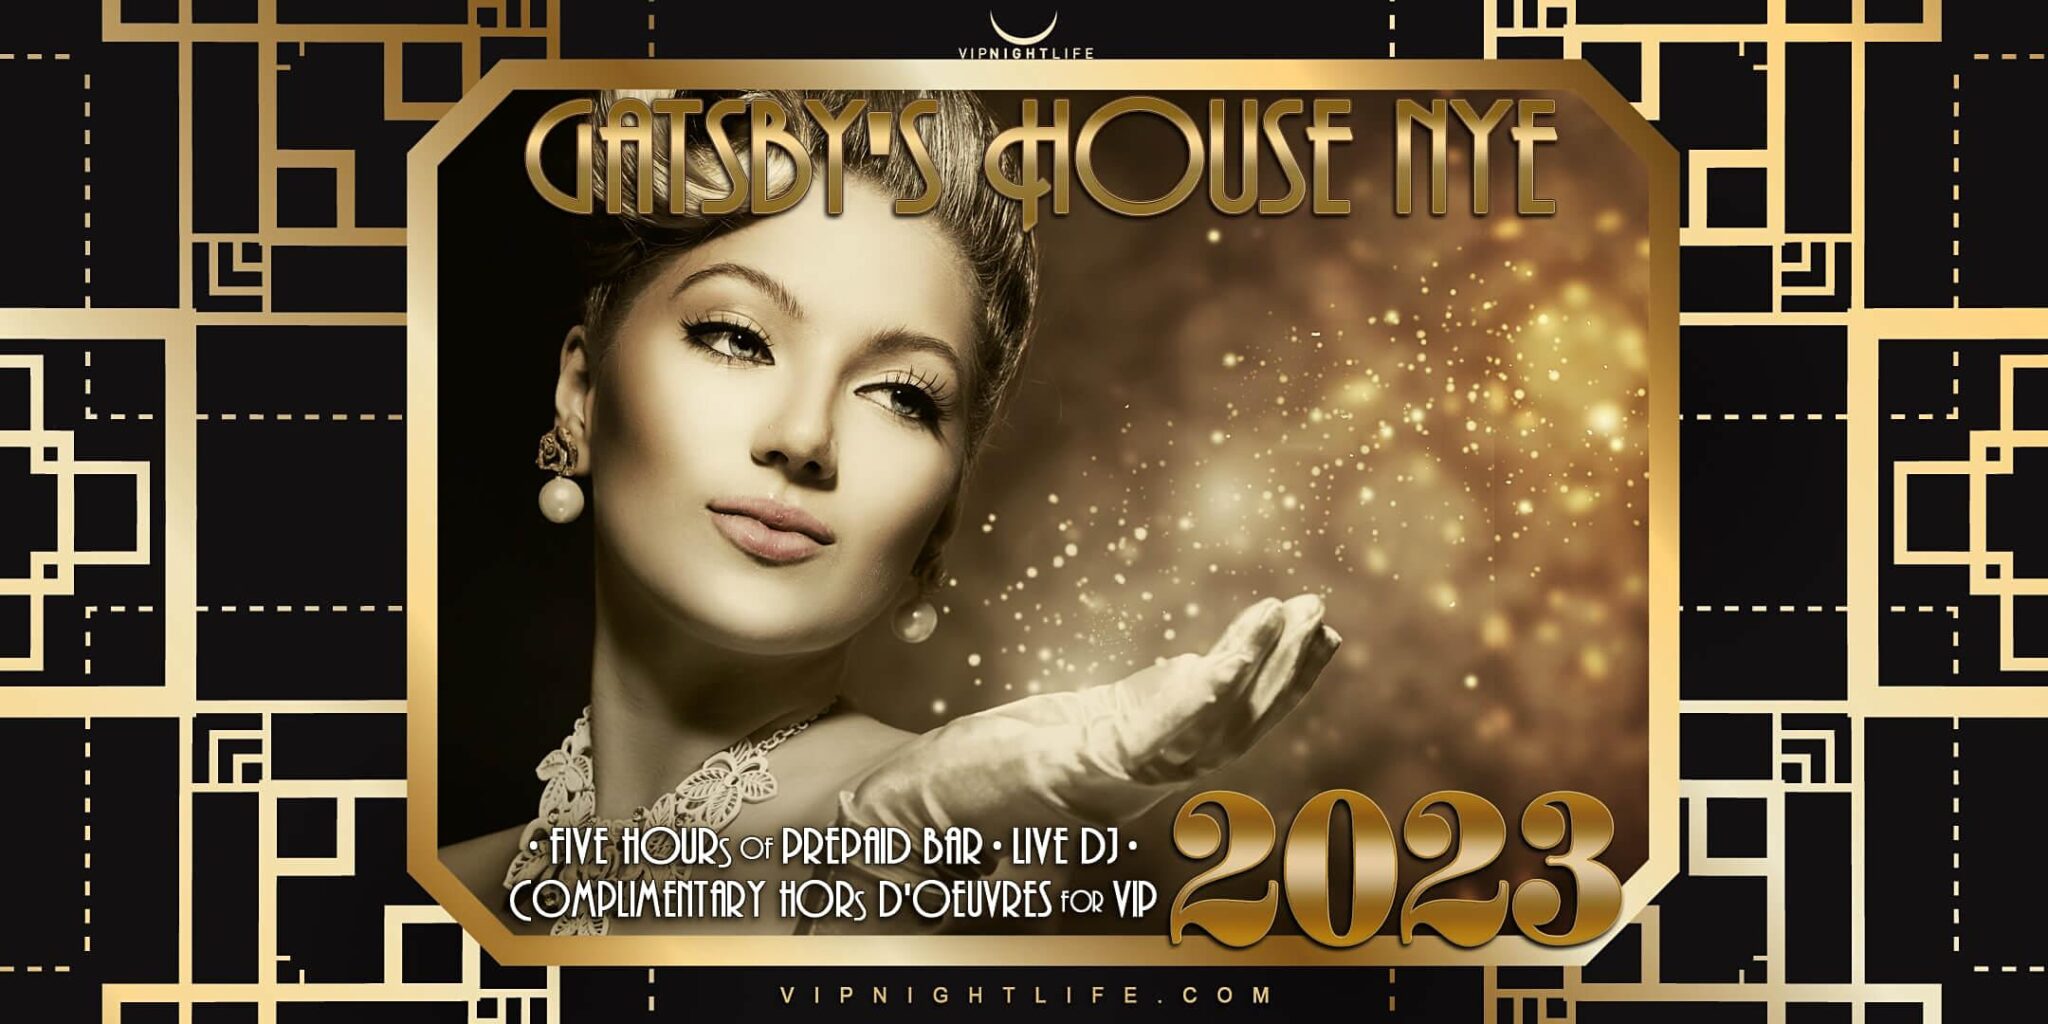 2023 Charlotte New Year's Eve Party Gatsby's House VIP Nightlife